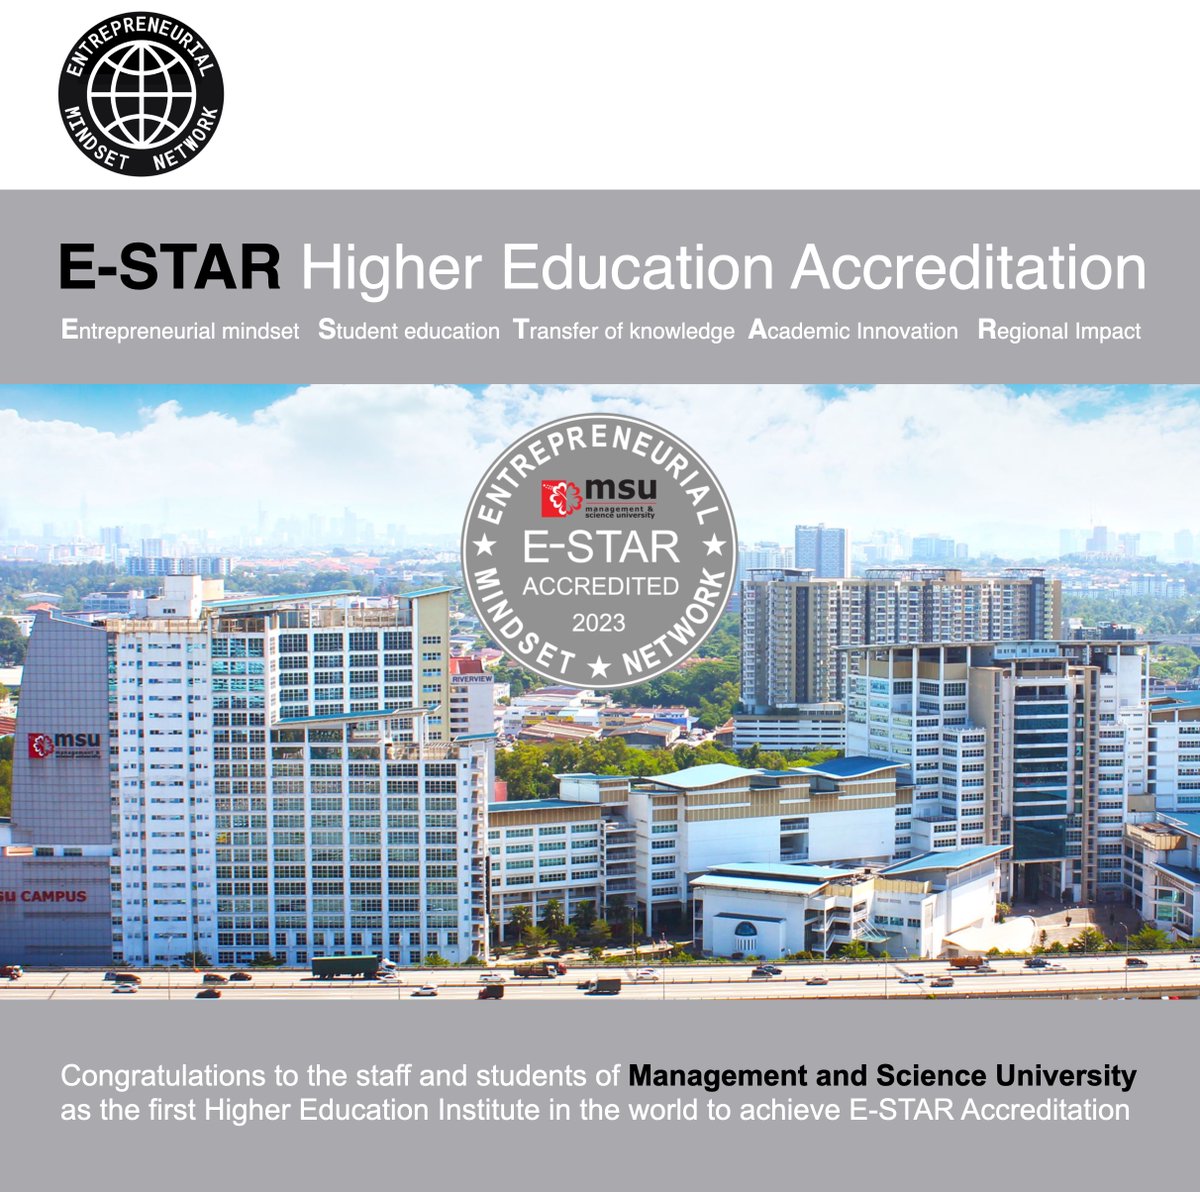 E-STAR Accreditation rewards Higher Education Institutions for their commitment to using the [E]ntrepreneurial mindset in [S]tudent education, [T]ransfer of knowledge, [A]cademic innovation and [R]egional impact. entrepreneurial-mindset.network/showcase/e-star